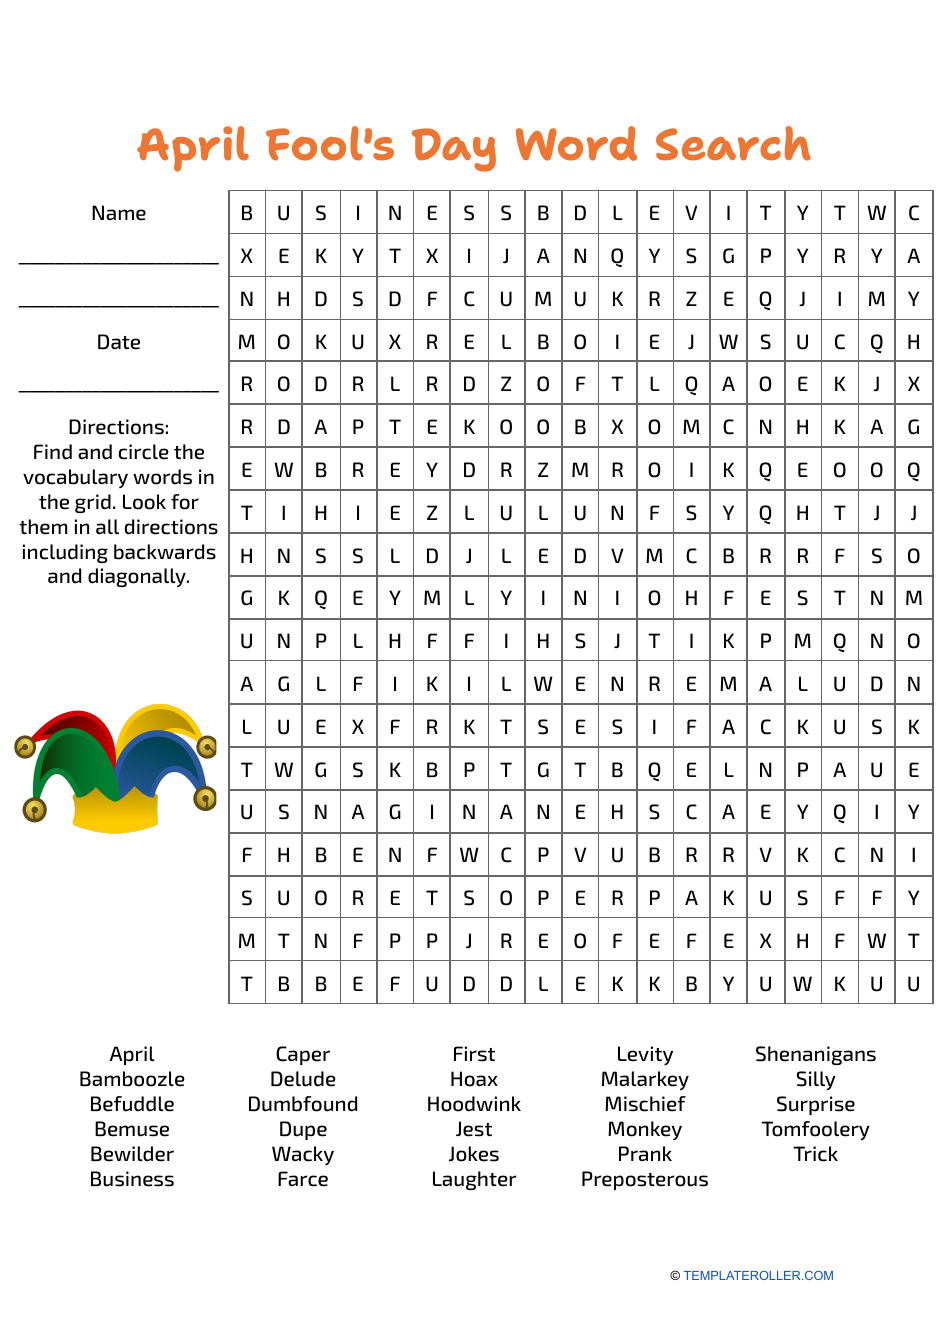 April Fool's Day Word Search With Answers - Printable Document Preview